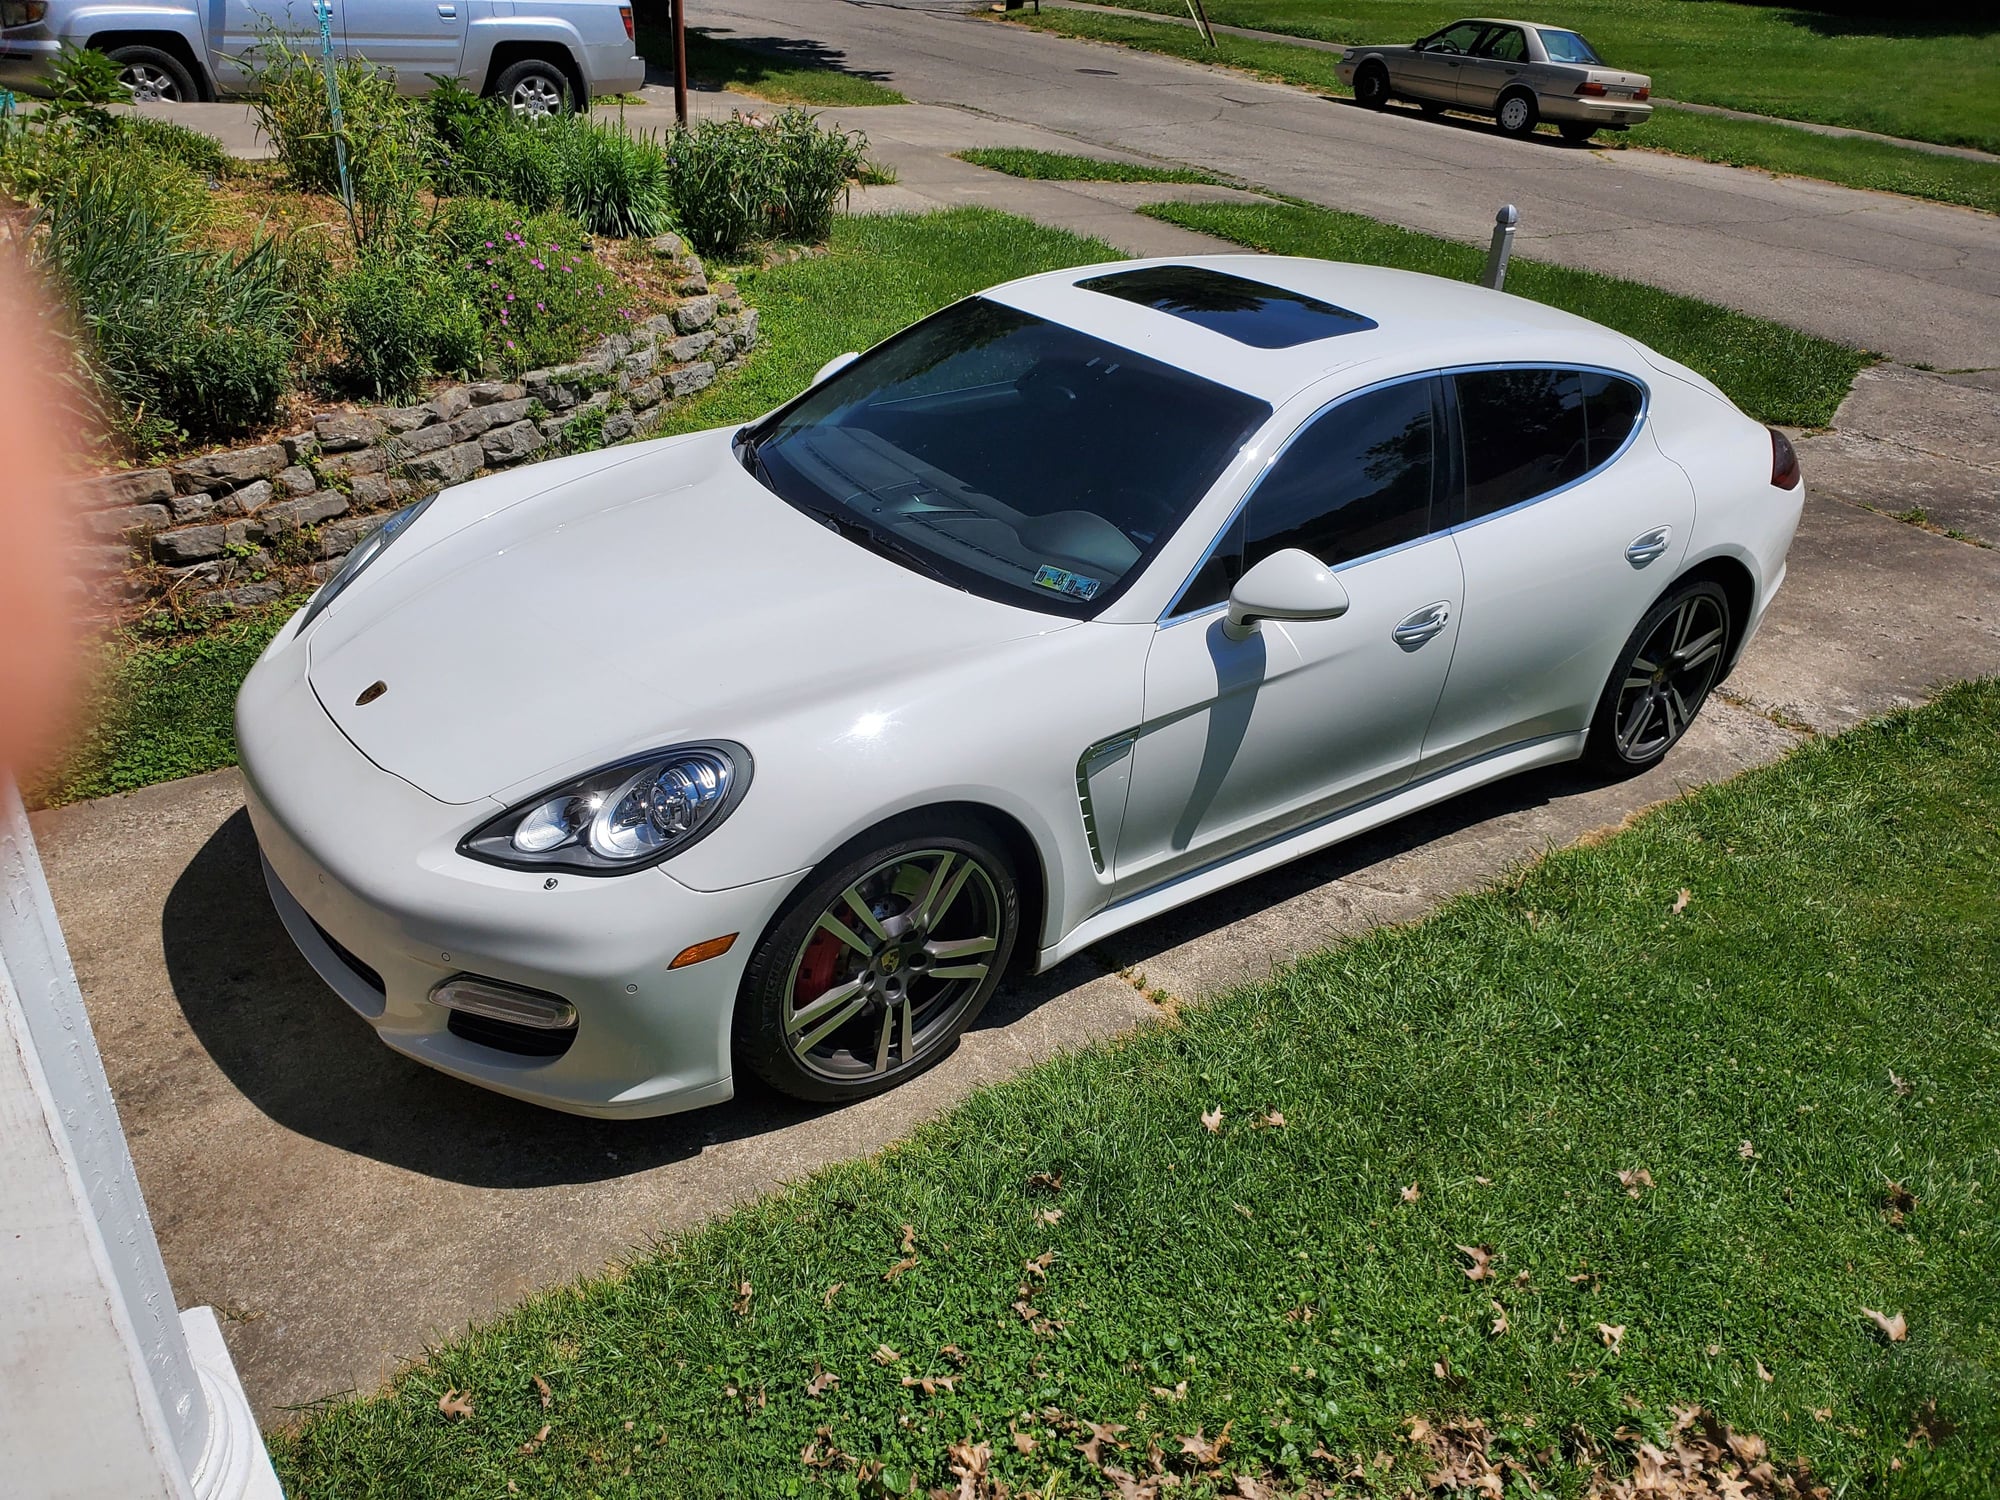 2011 Porsche Panamera - 2011 Panamera Turbo White/Cocoa and Carbon Fiber - Used - VIN WP0AC2A71BL090165 - 90,450 Miles - 8 cyl - AWD - Automatic - Sedan - White - Portsmouth, OH 45662, United States